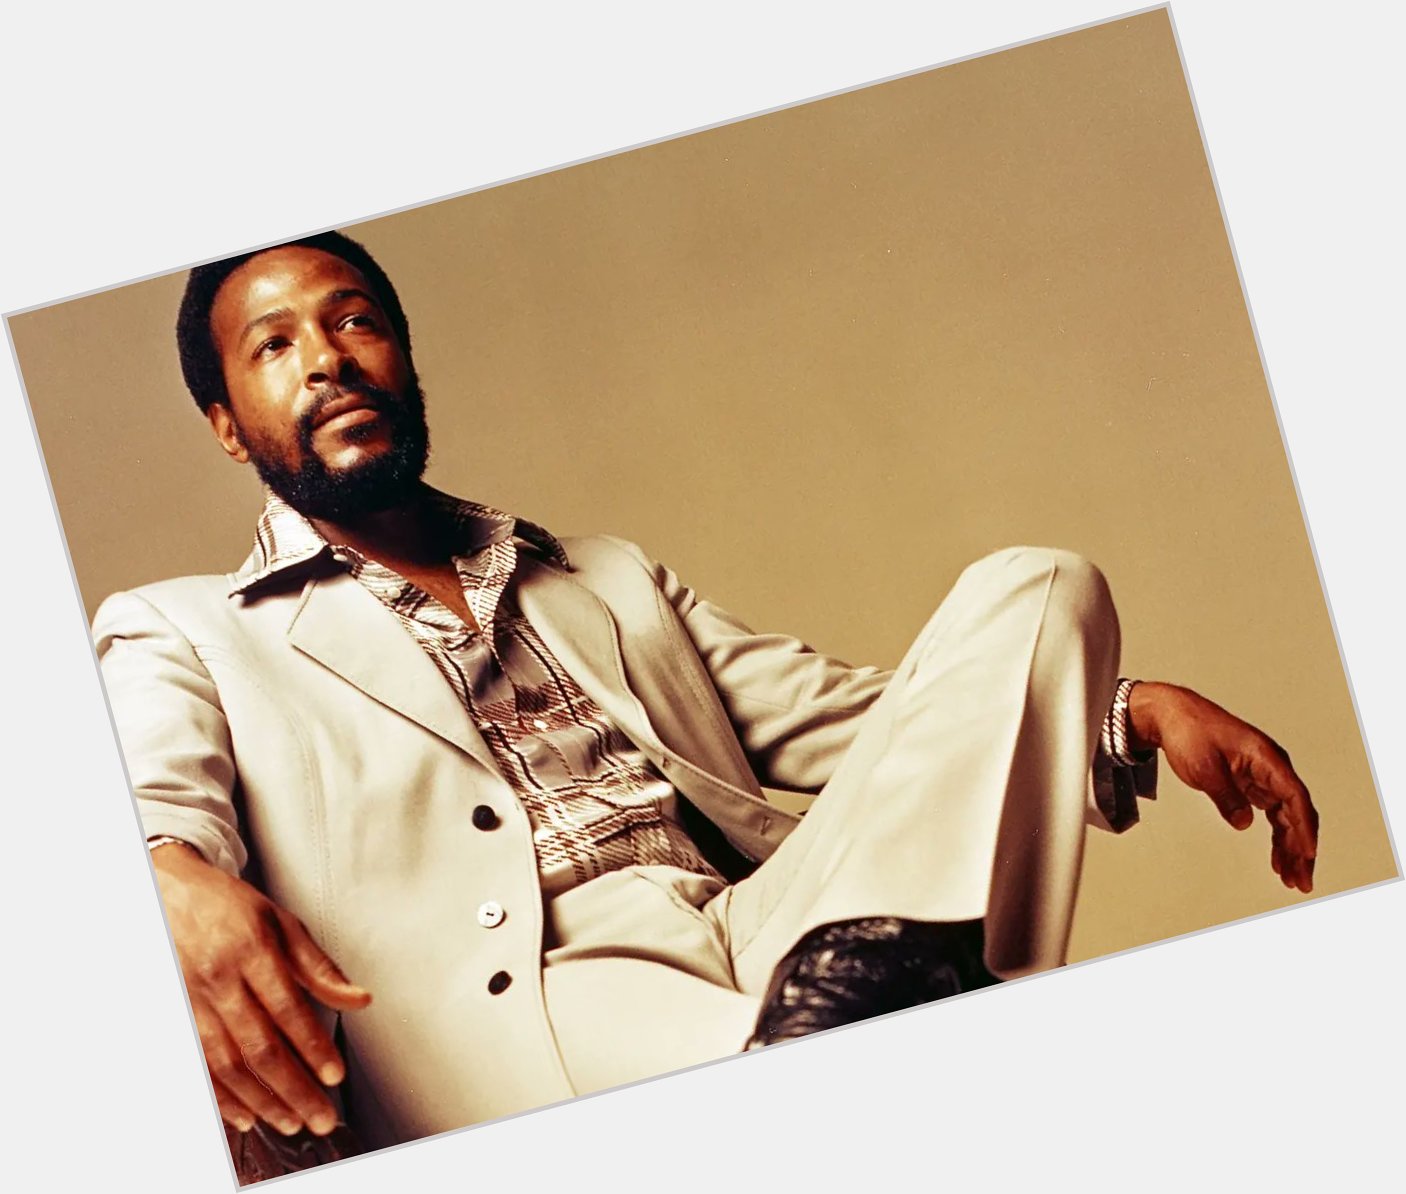 Happy Birthday to the late great Marvin Gaye RS 